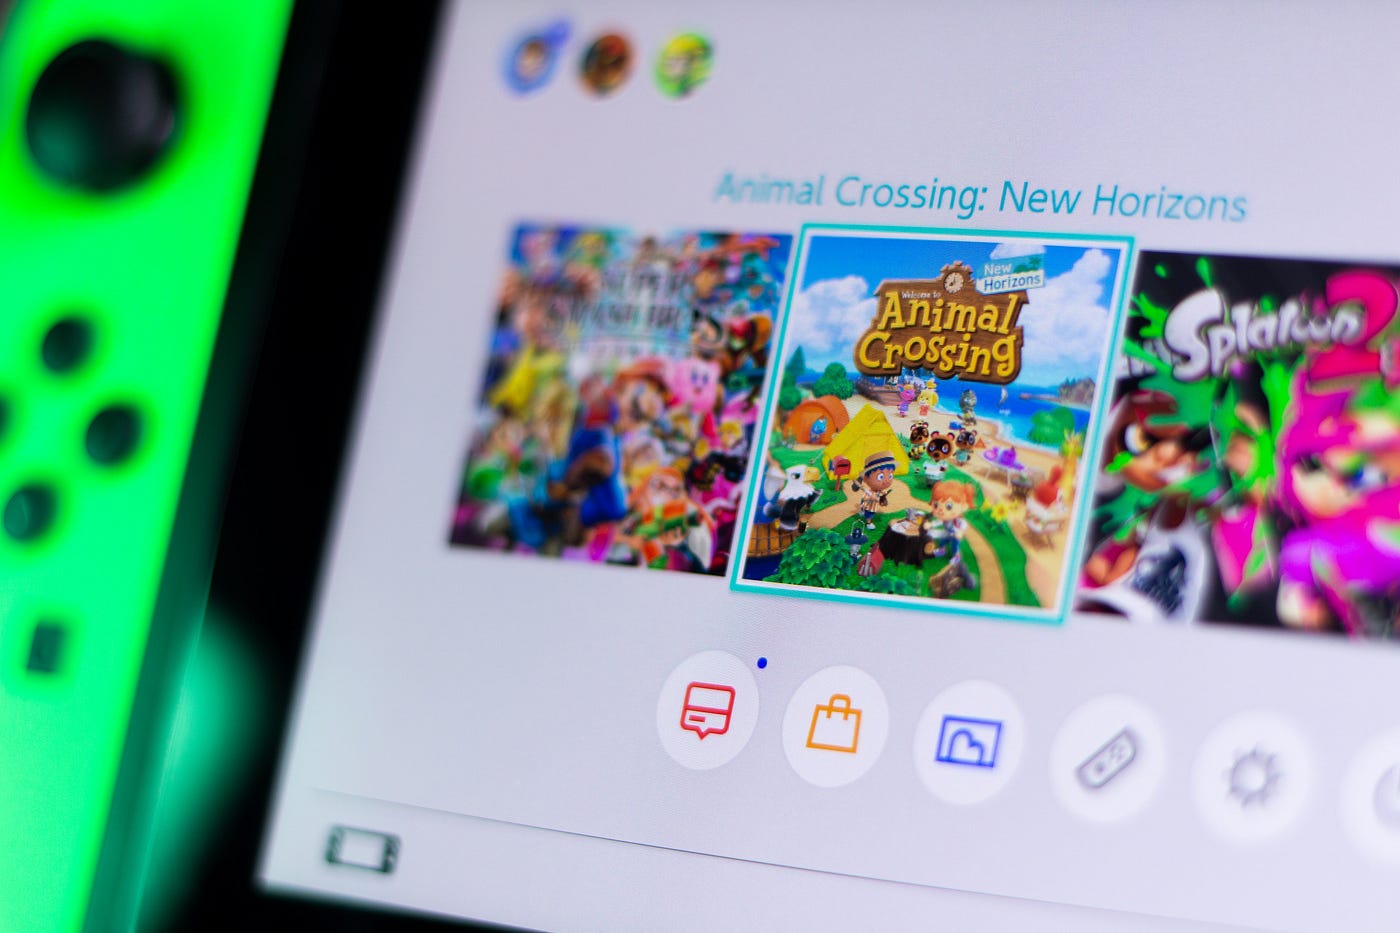 13 New Things We Saw in the Animal Crossing: New Horizons Nintendo